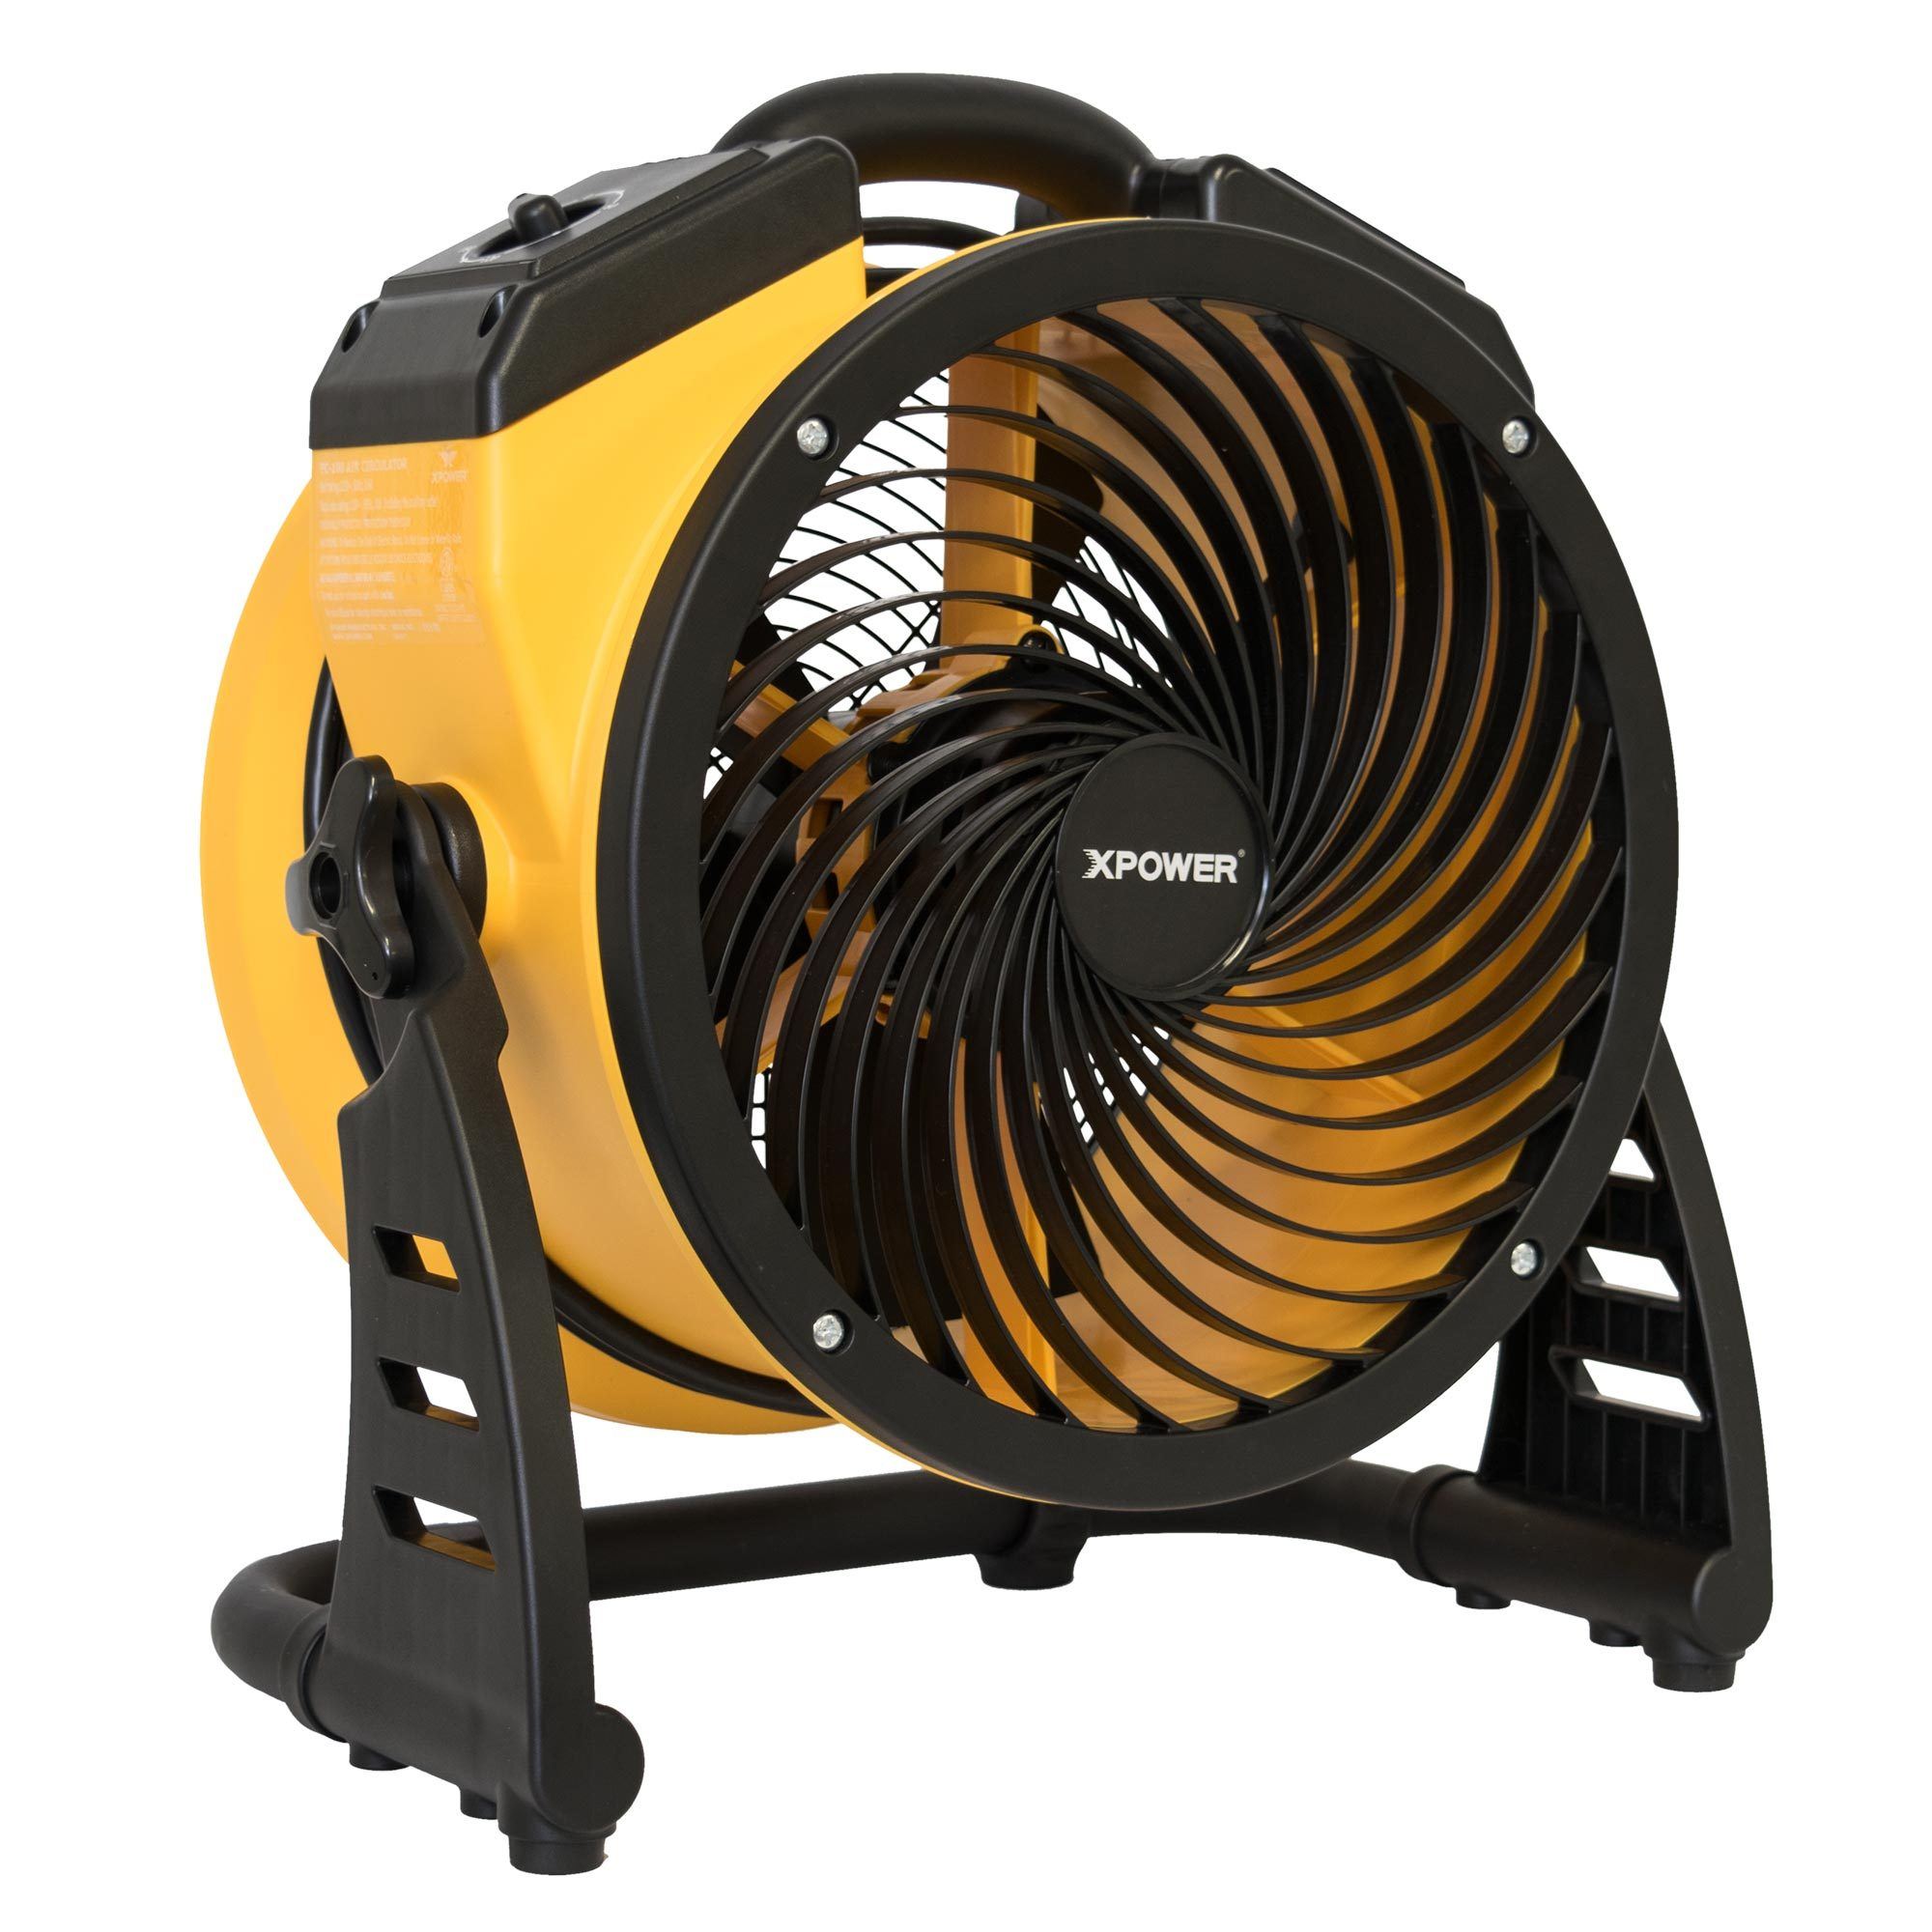 garages-workshops-utility-fans-and-blowers.jpg